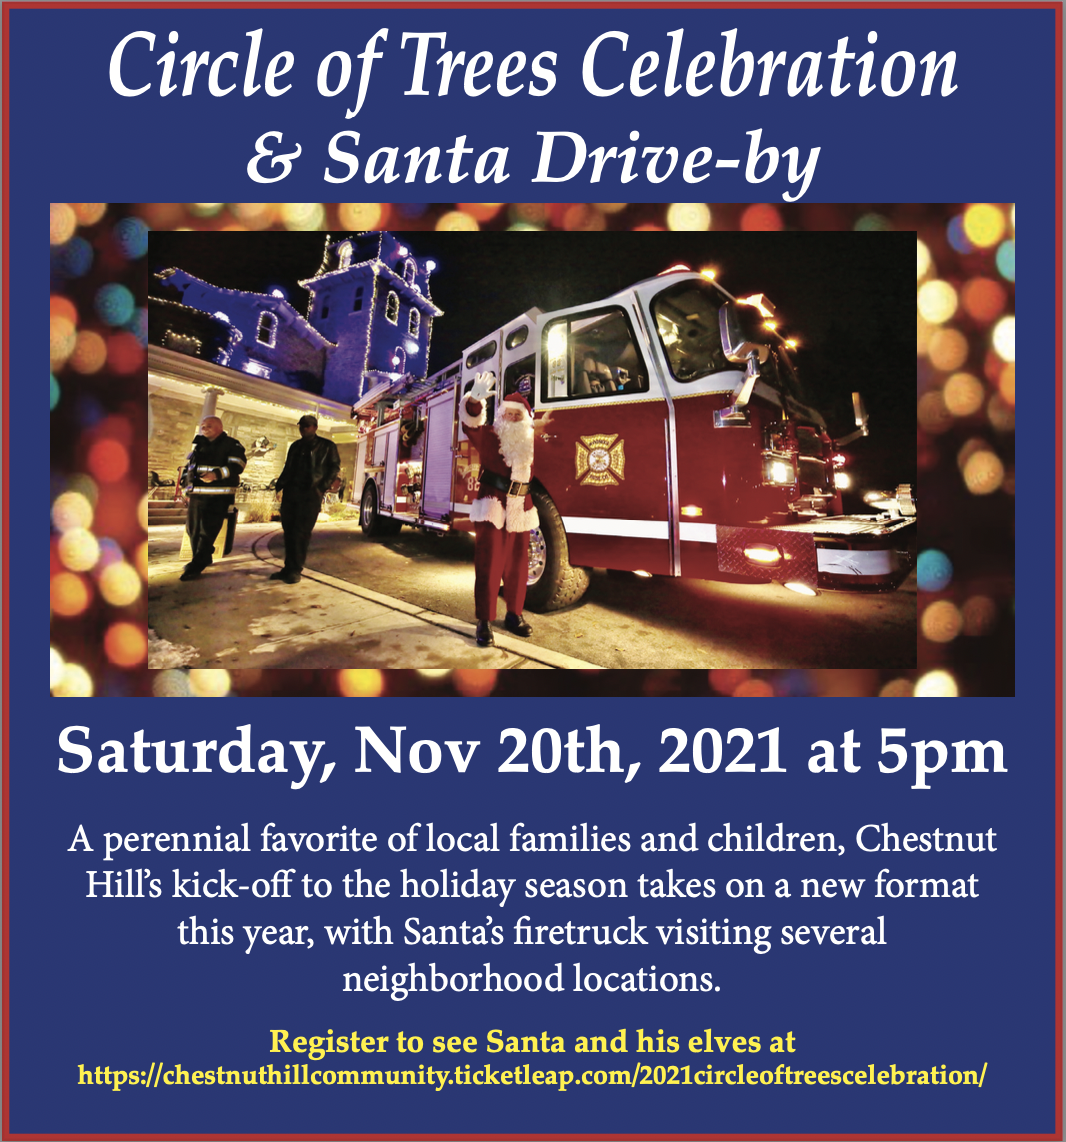 //chestnuthill.org/circle_of_trees_celebration.php